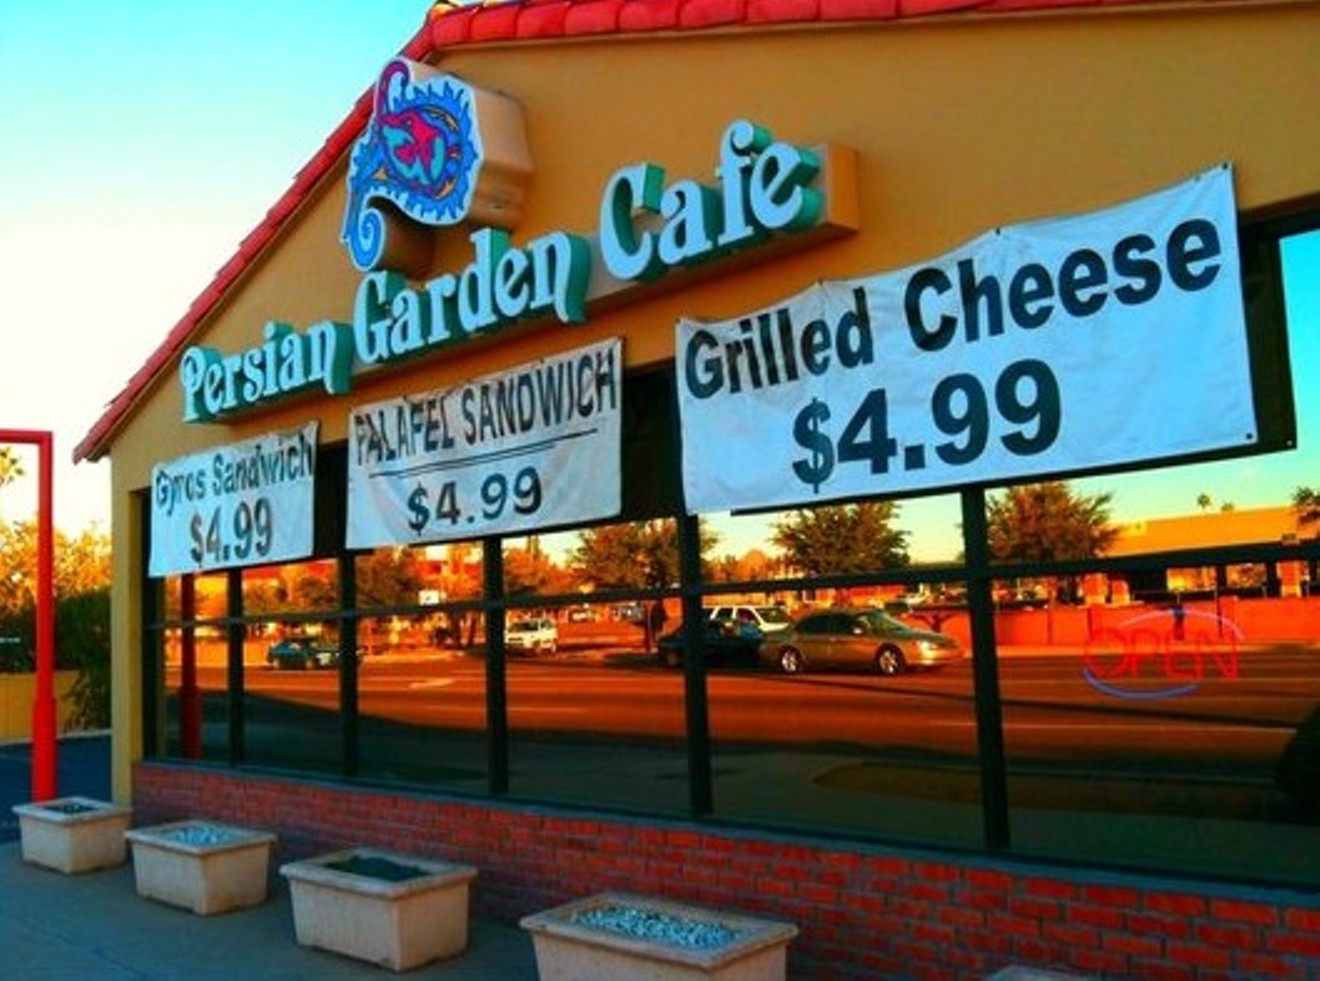 The 20-year-old Persian Garden Café will be closed by the end of January.